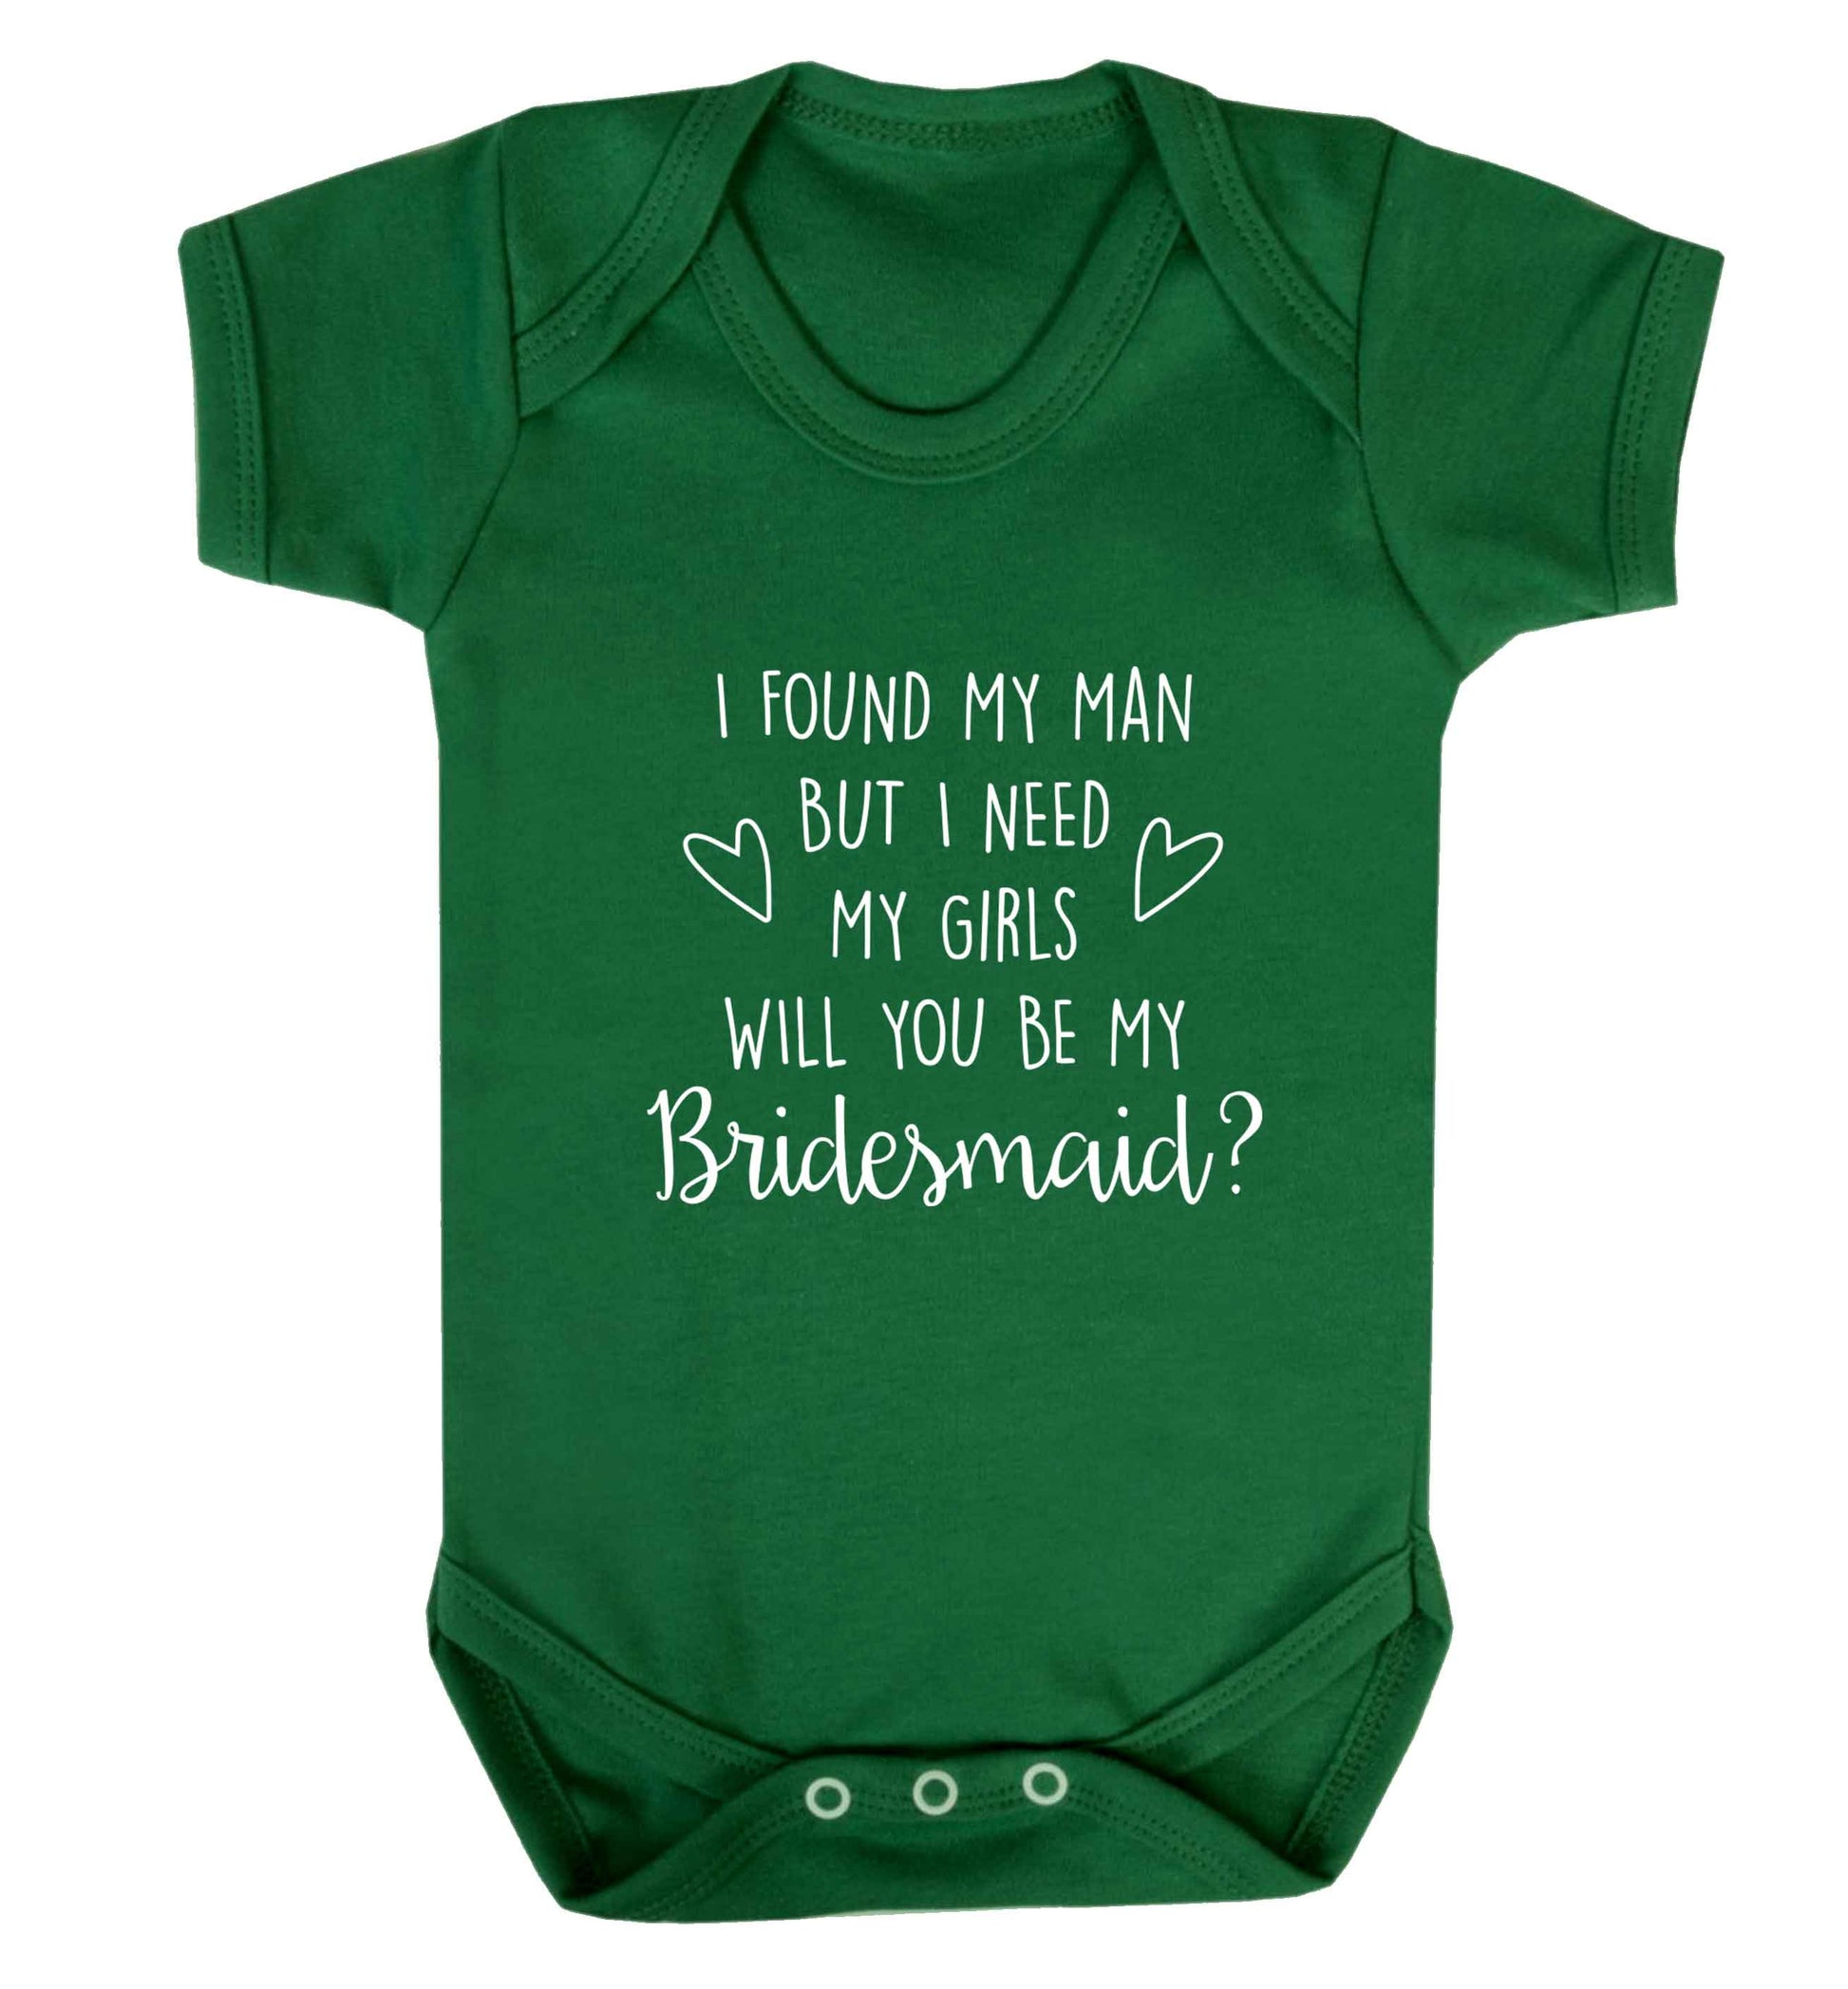 I found my man but I need my girls will you be my bridesmaid? baby vest green 18-24 months